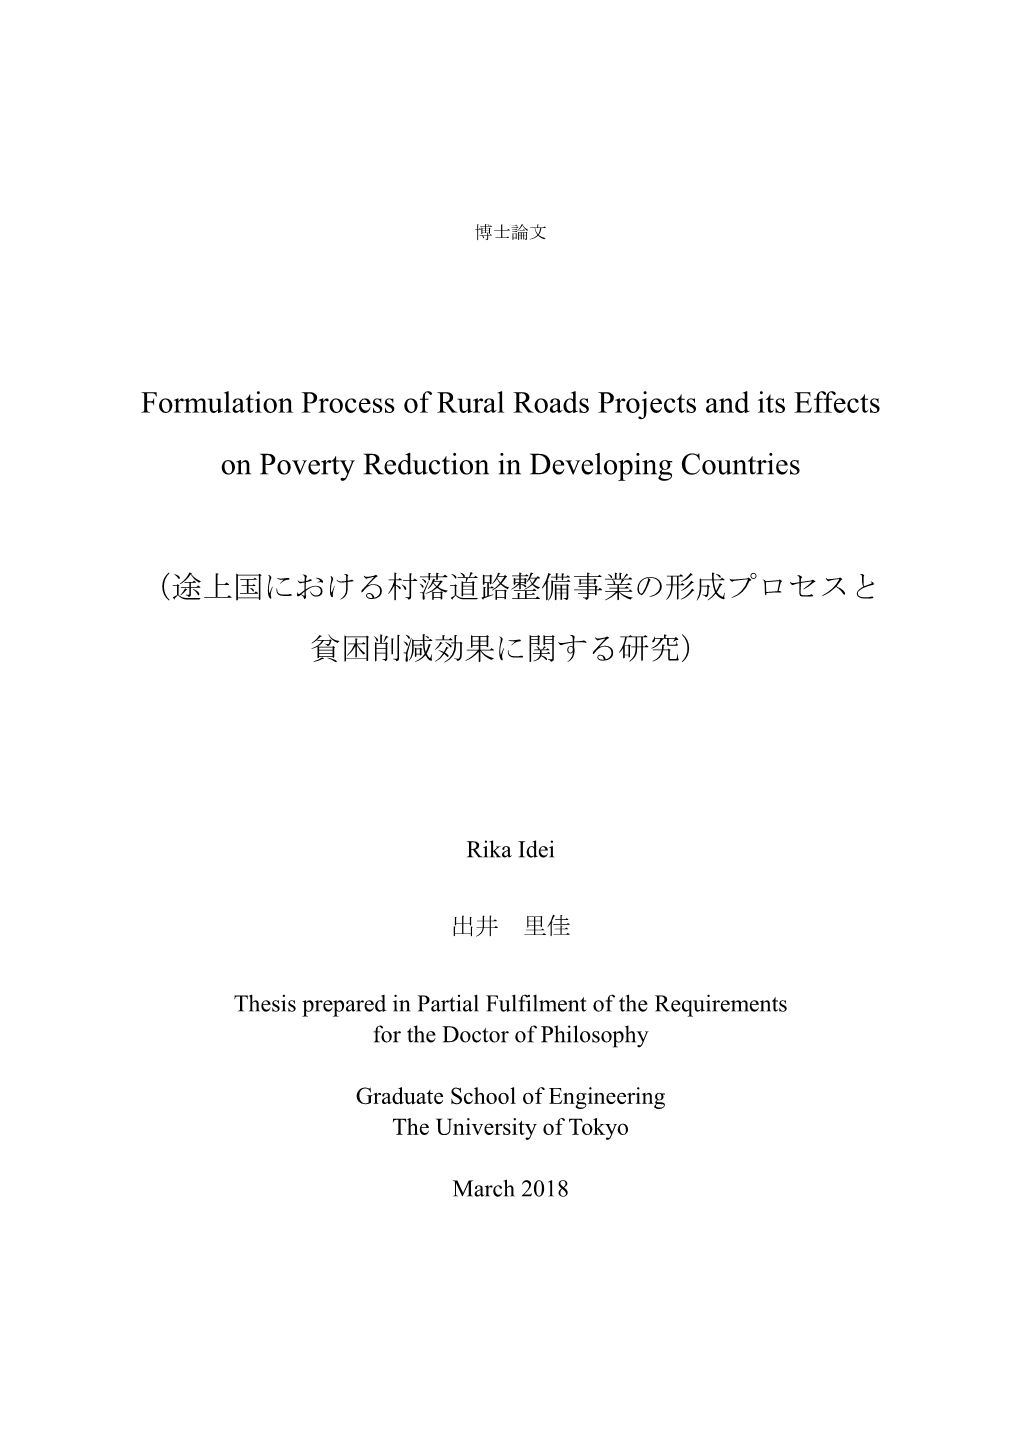 Formulation Process of Rural Roads Projects and Its Effects on Poverty Reduction in Developing Countries